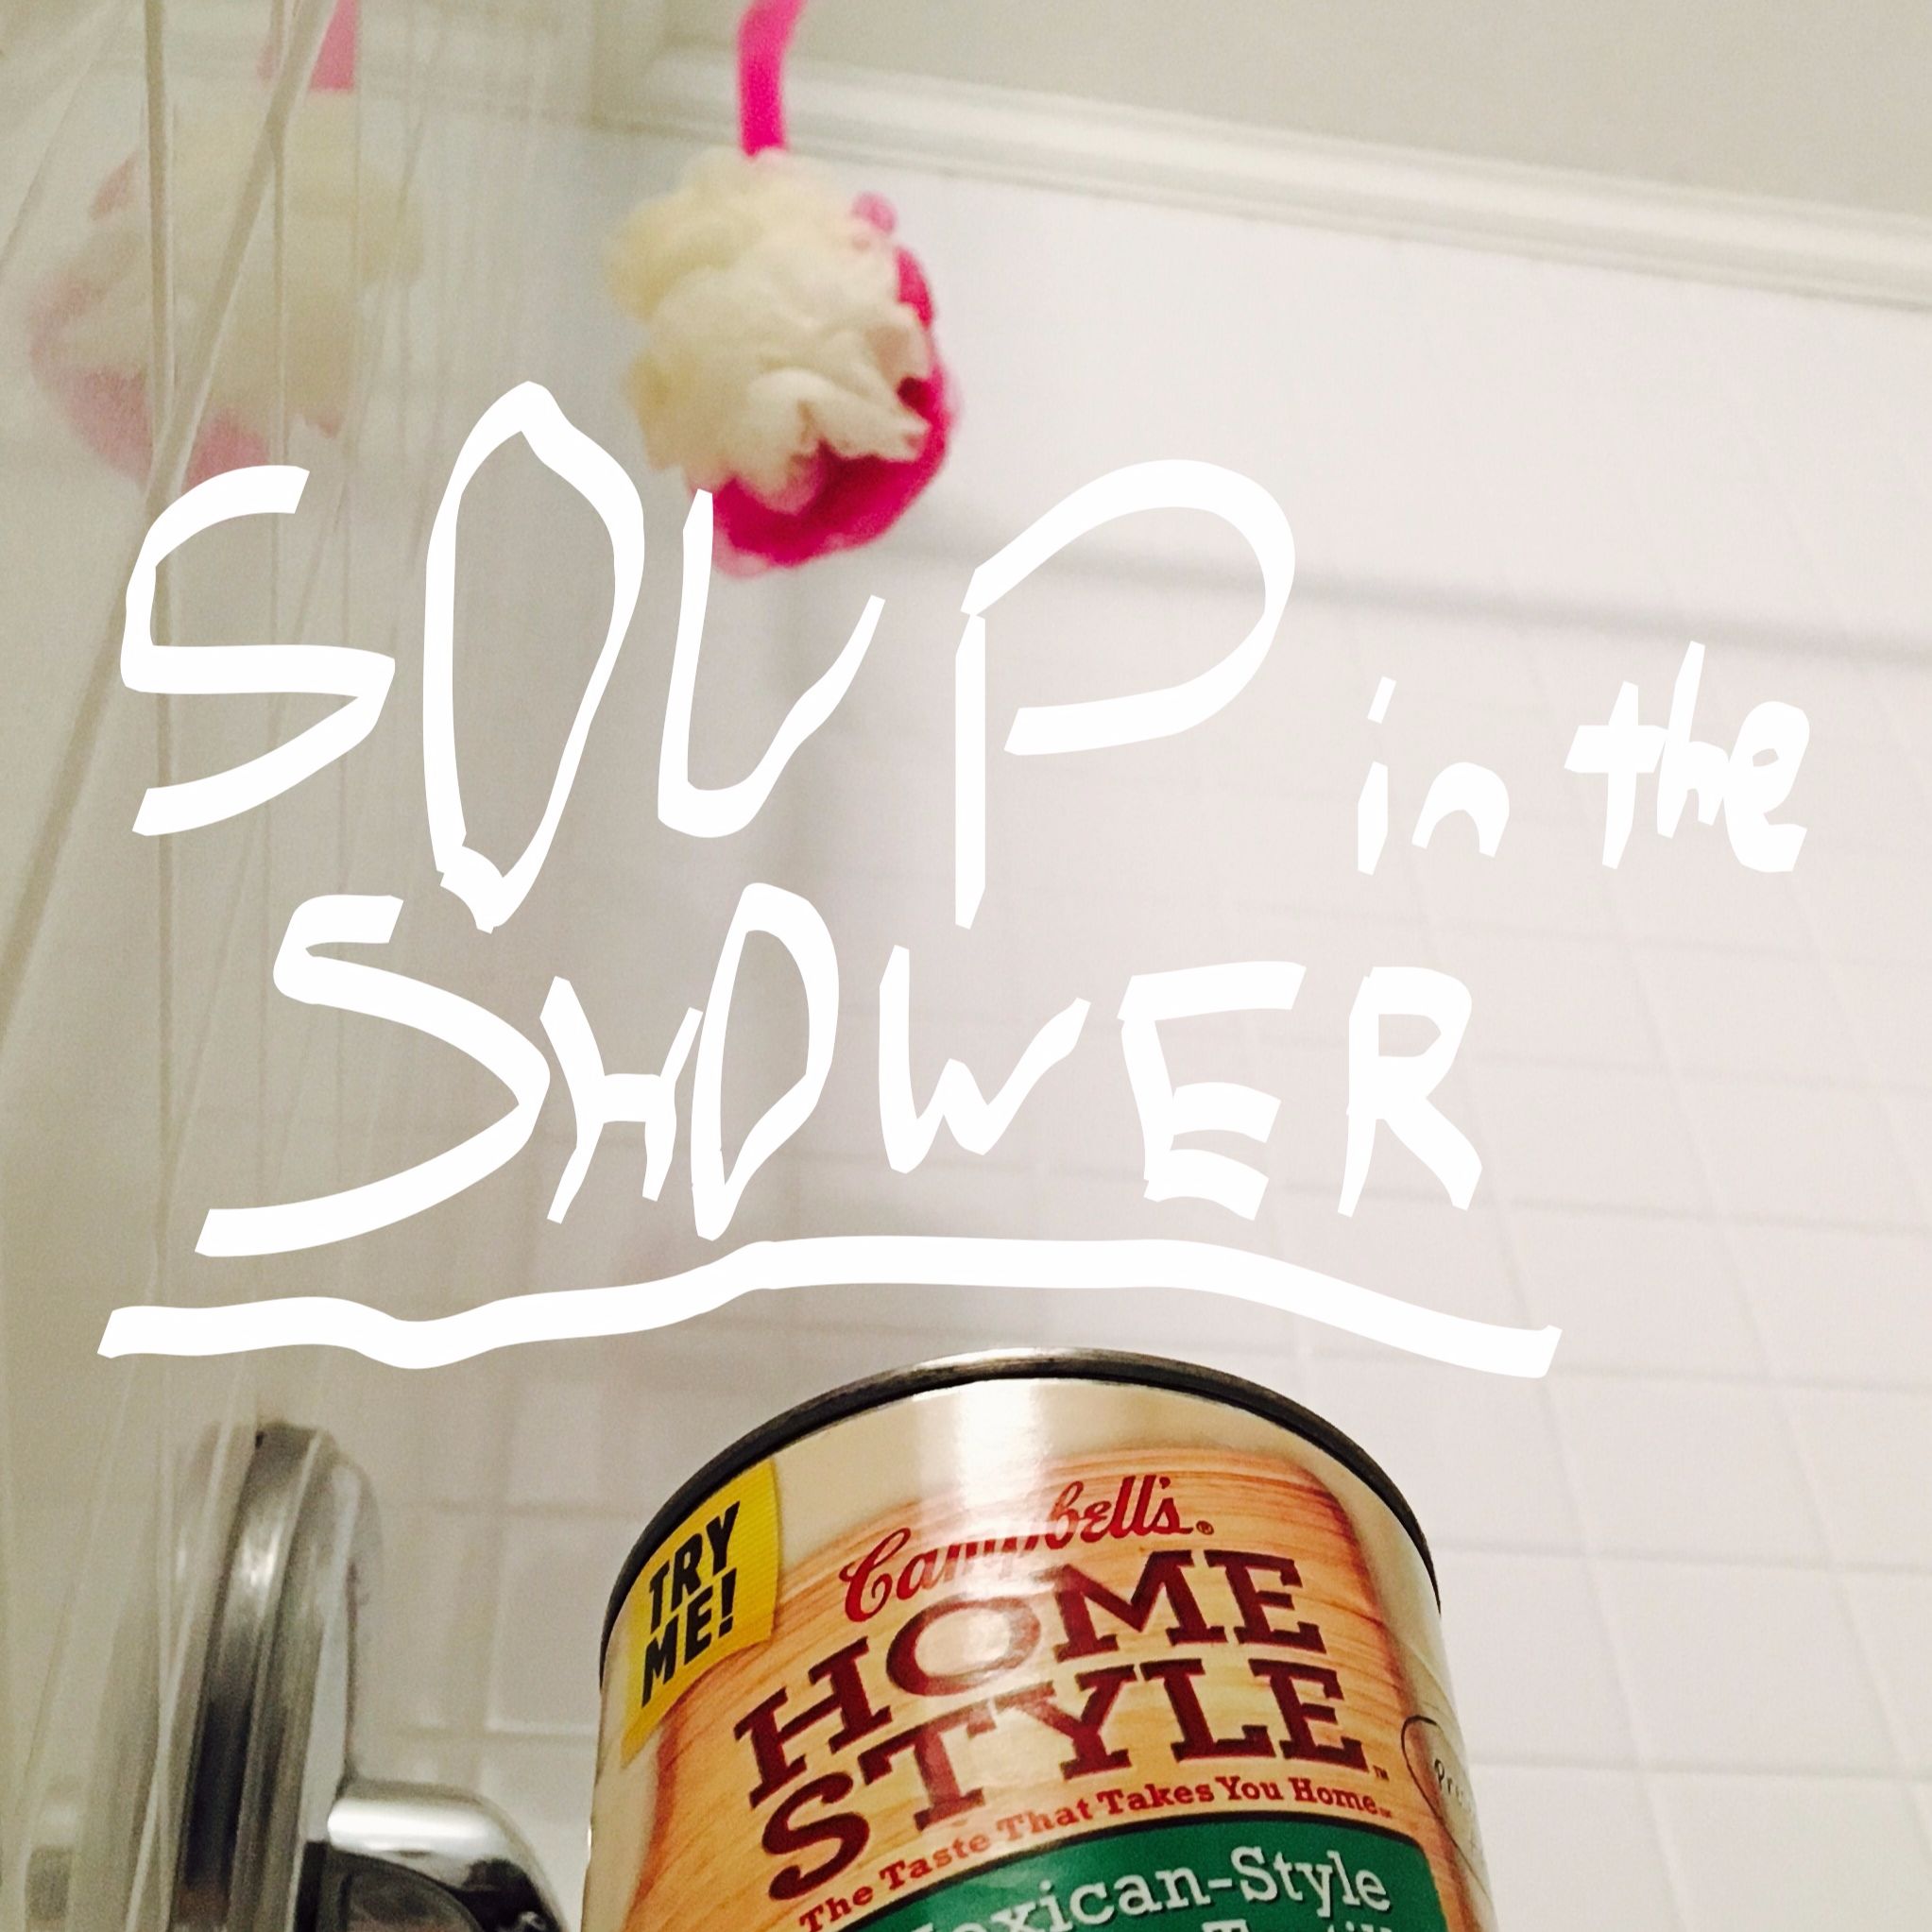 Soup in the Shower